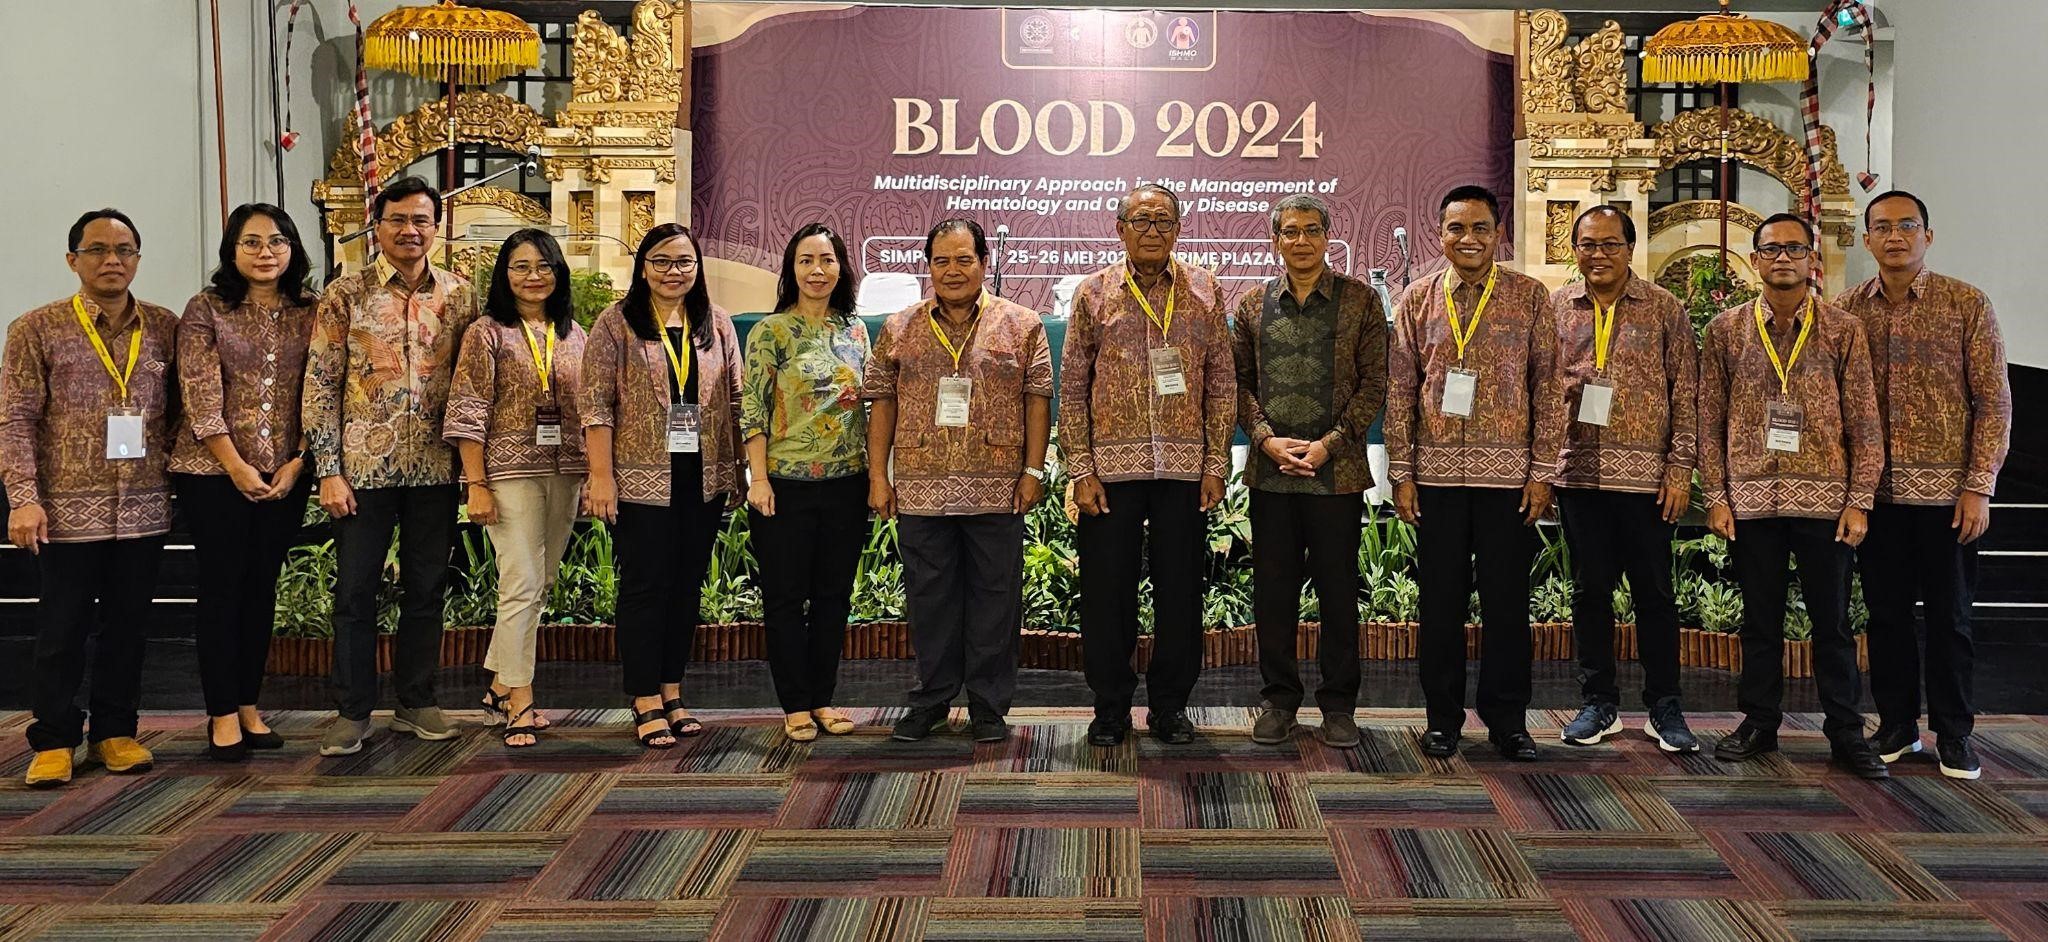 BLOOD 2024: Multidisciplinary Approach in the Management of Hematology and Oncology Disease